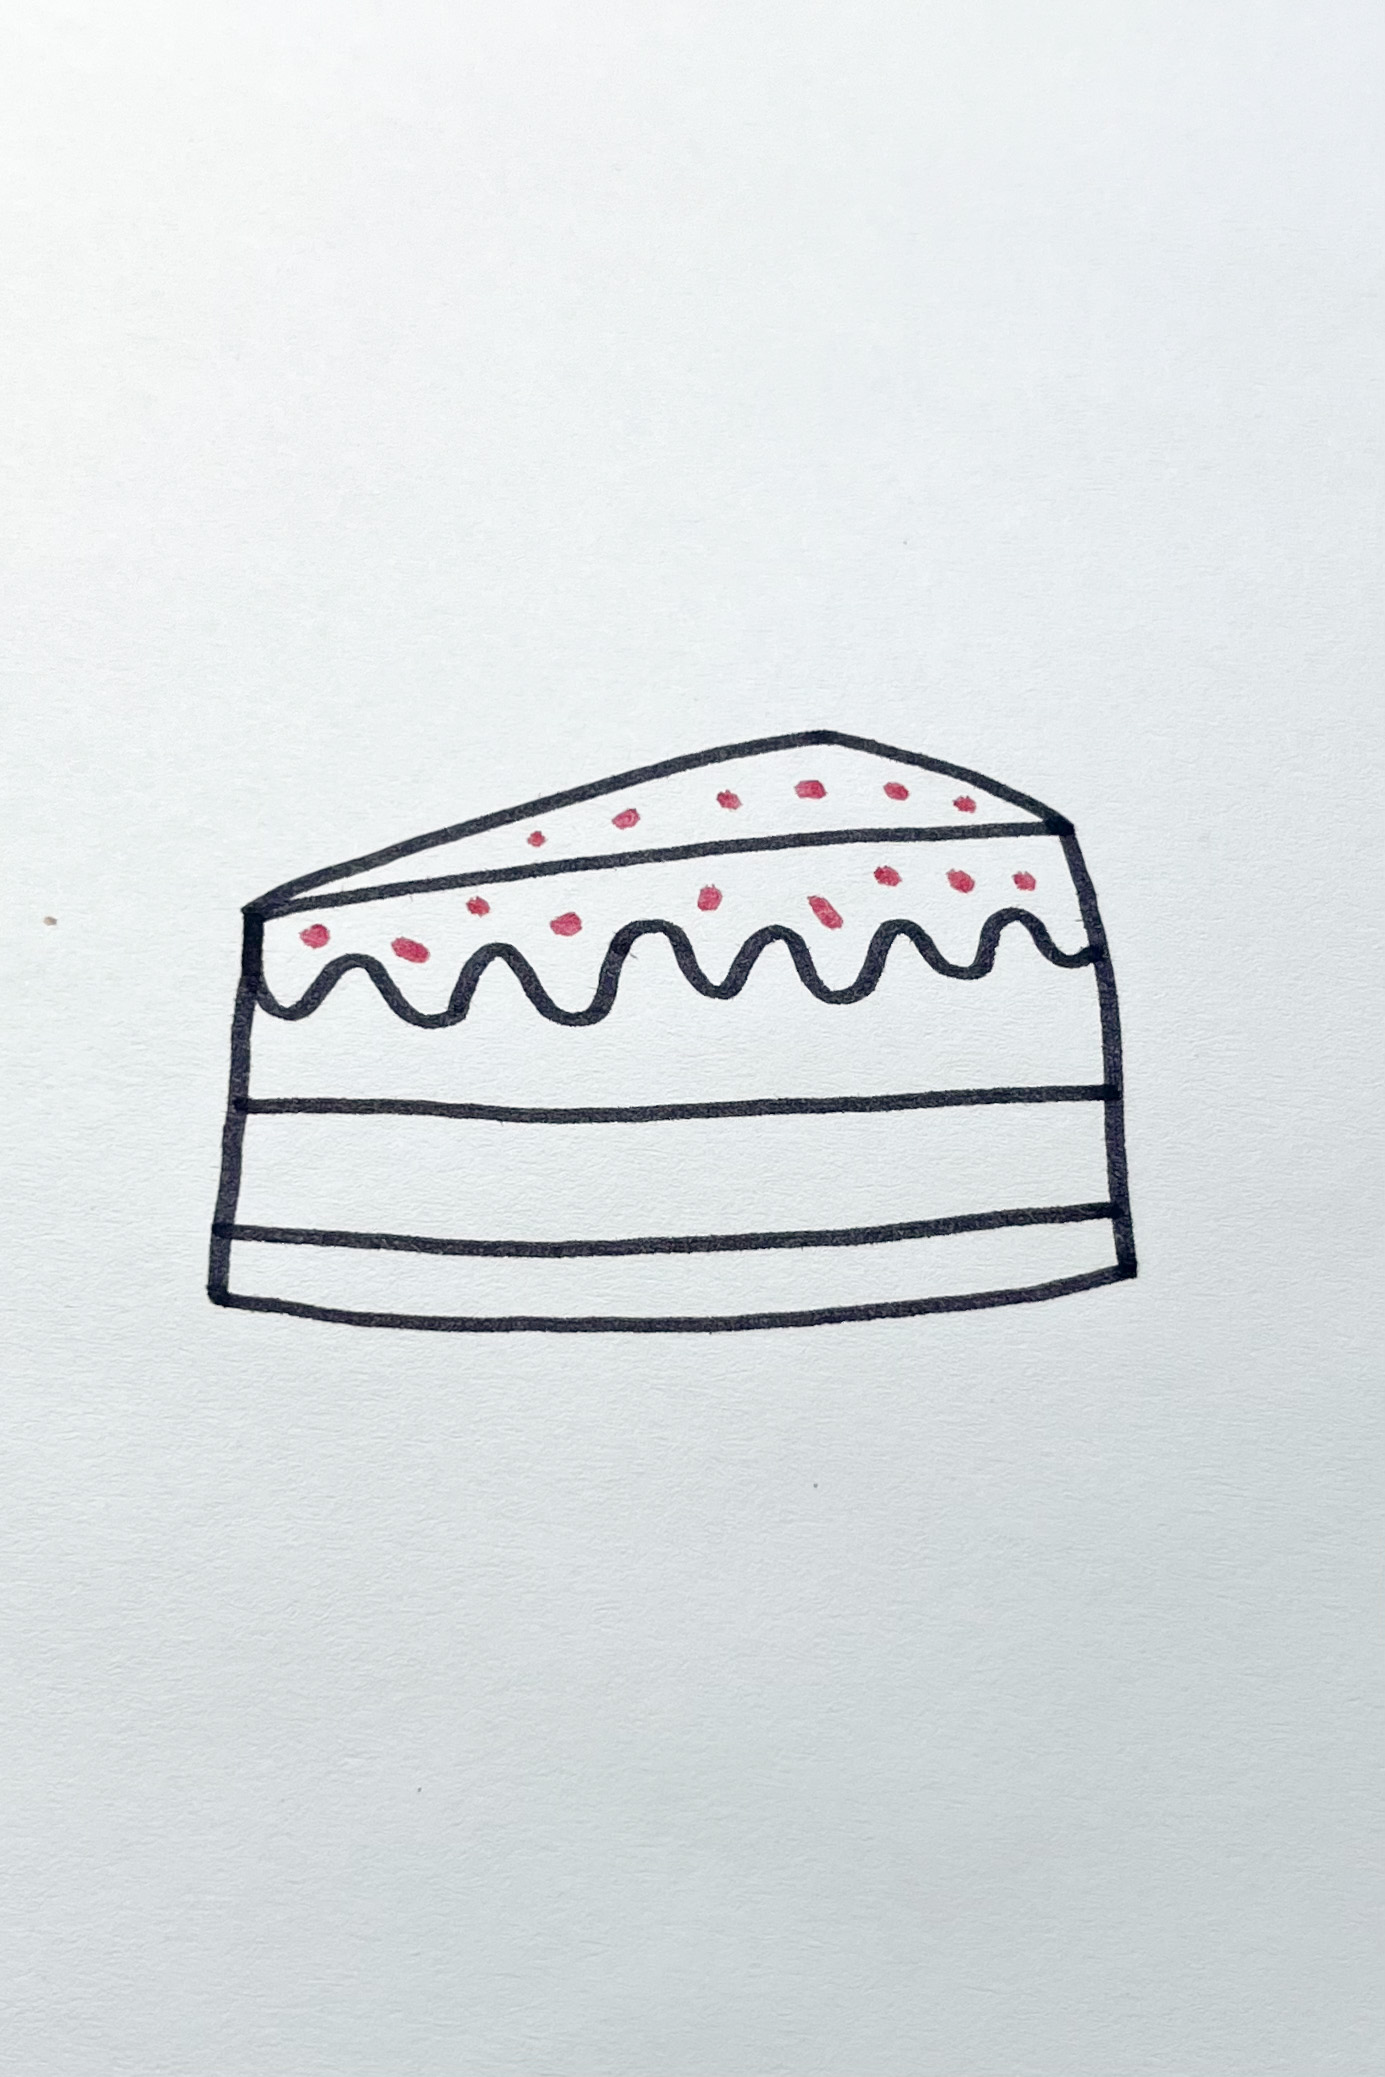 piece of cake drawing